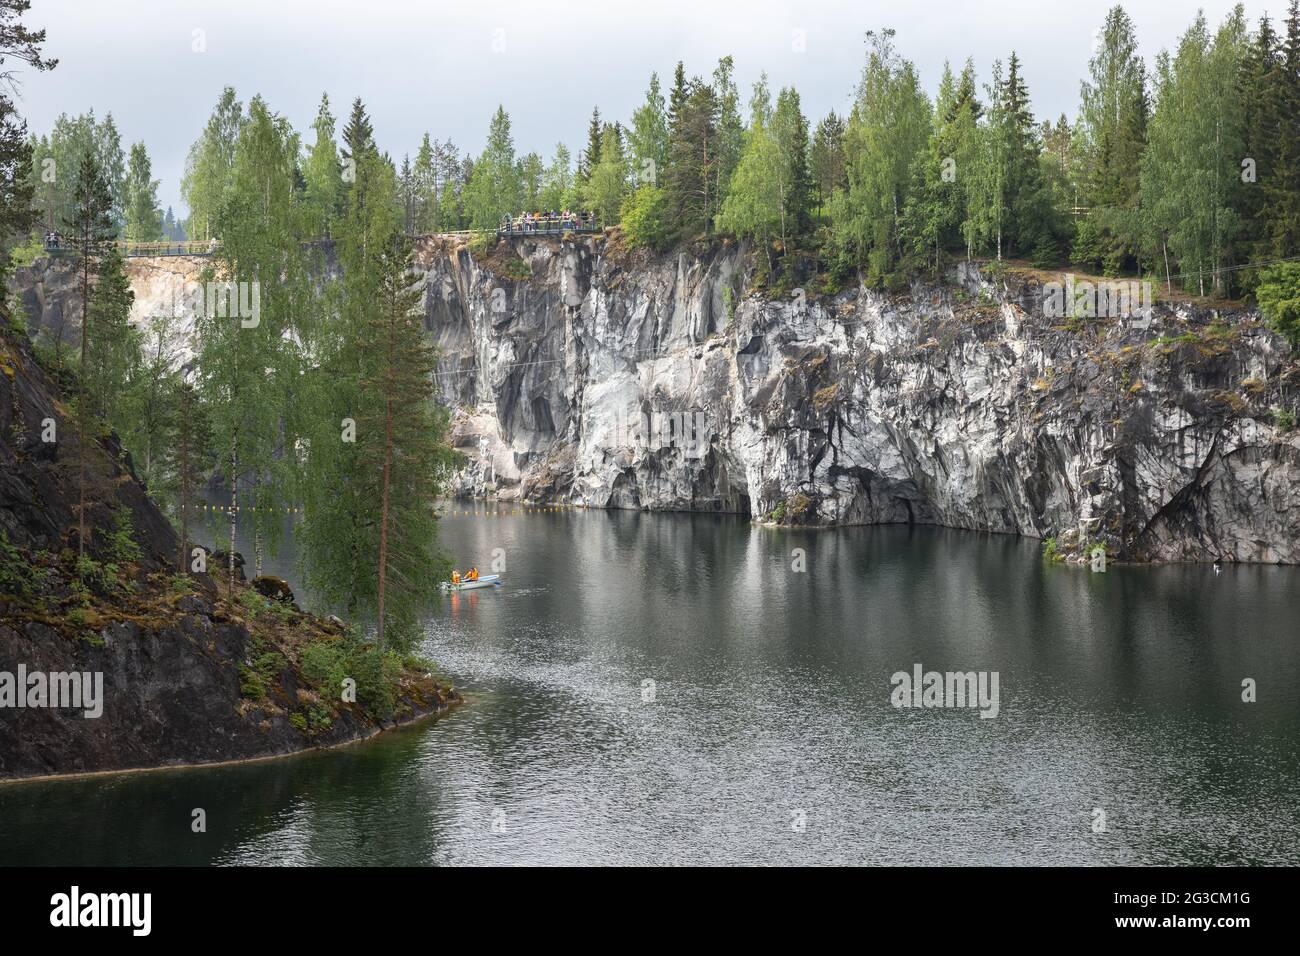 Ruskeala, Russia - June 12, 2021: Karelian landscape with tourists in a boat sailing through a former marble quarry filled with groundwater on a dayti Stock Photo